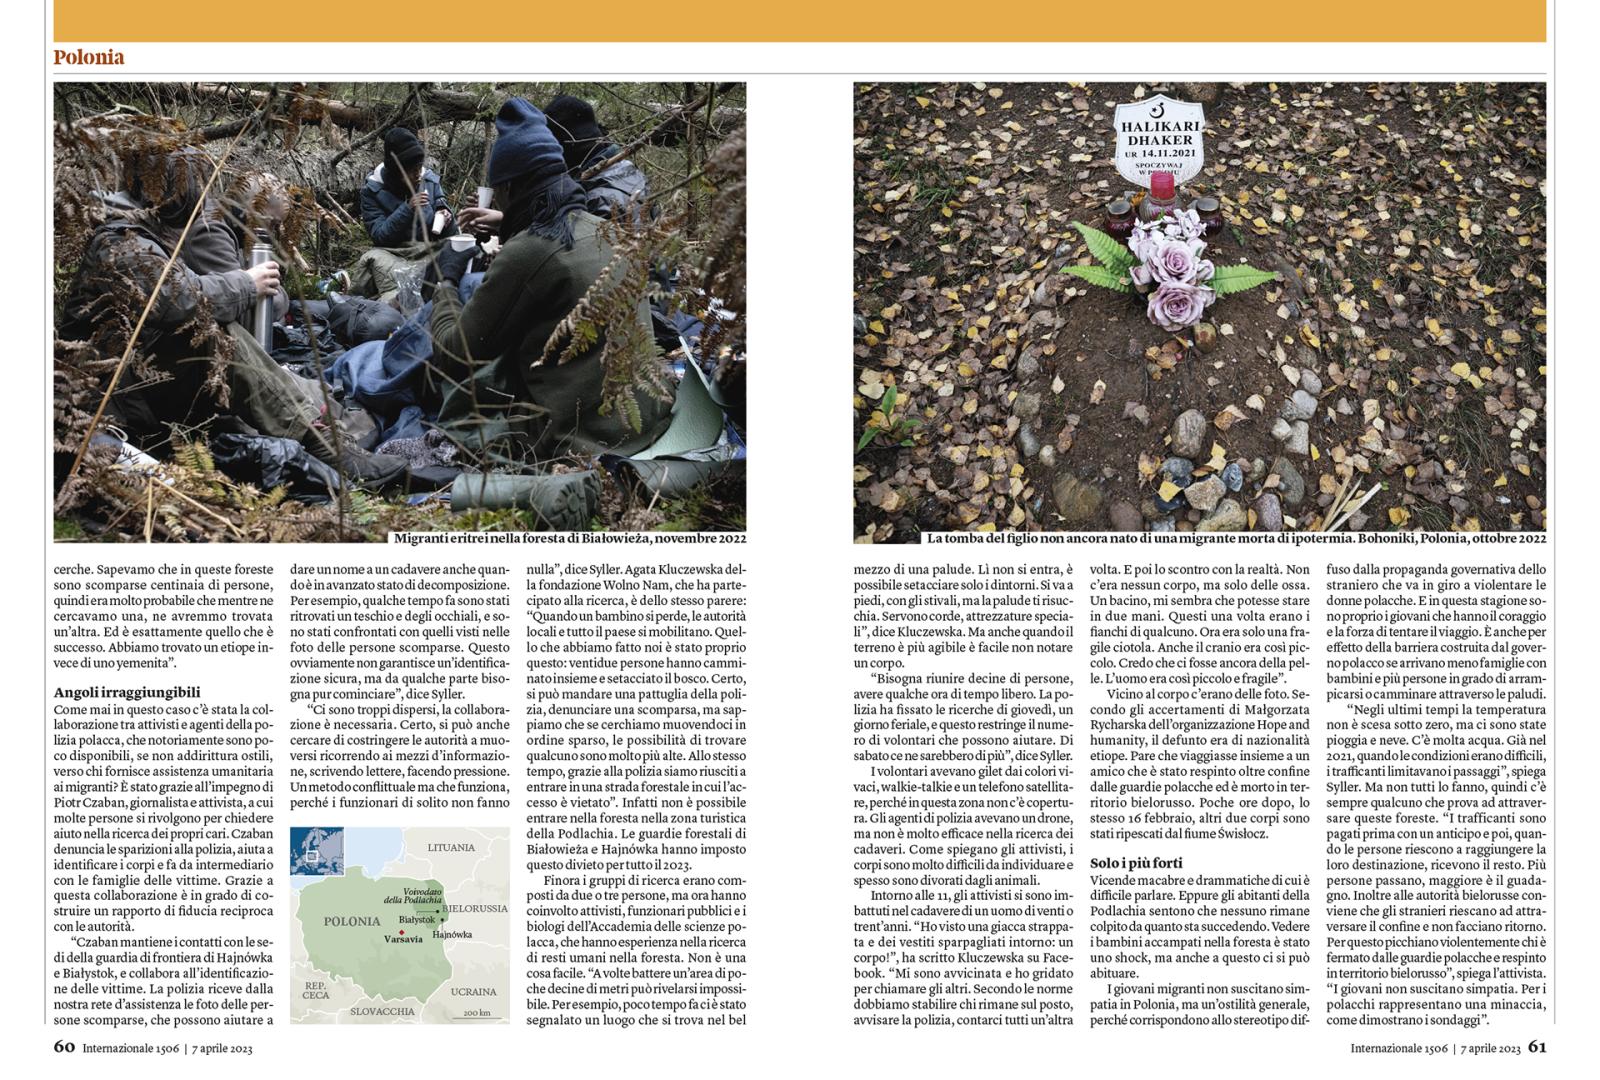 INTERNAZIONALE Magazine - publication about refugees in Bialowieza Forest